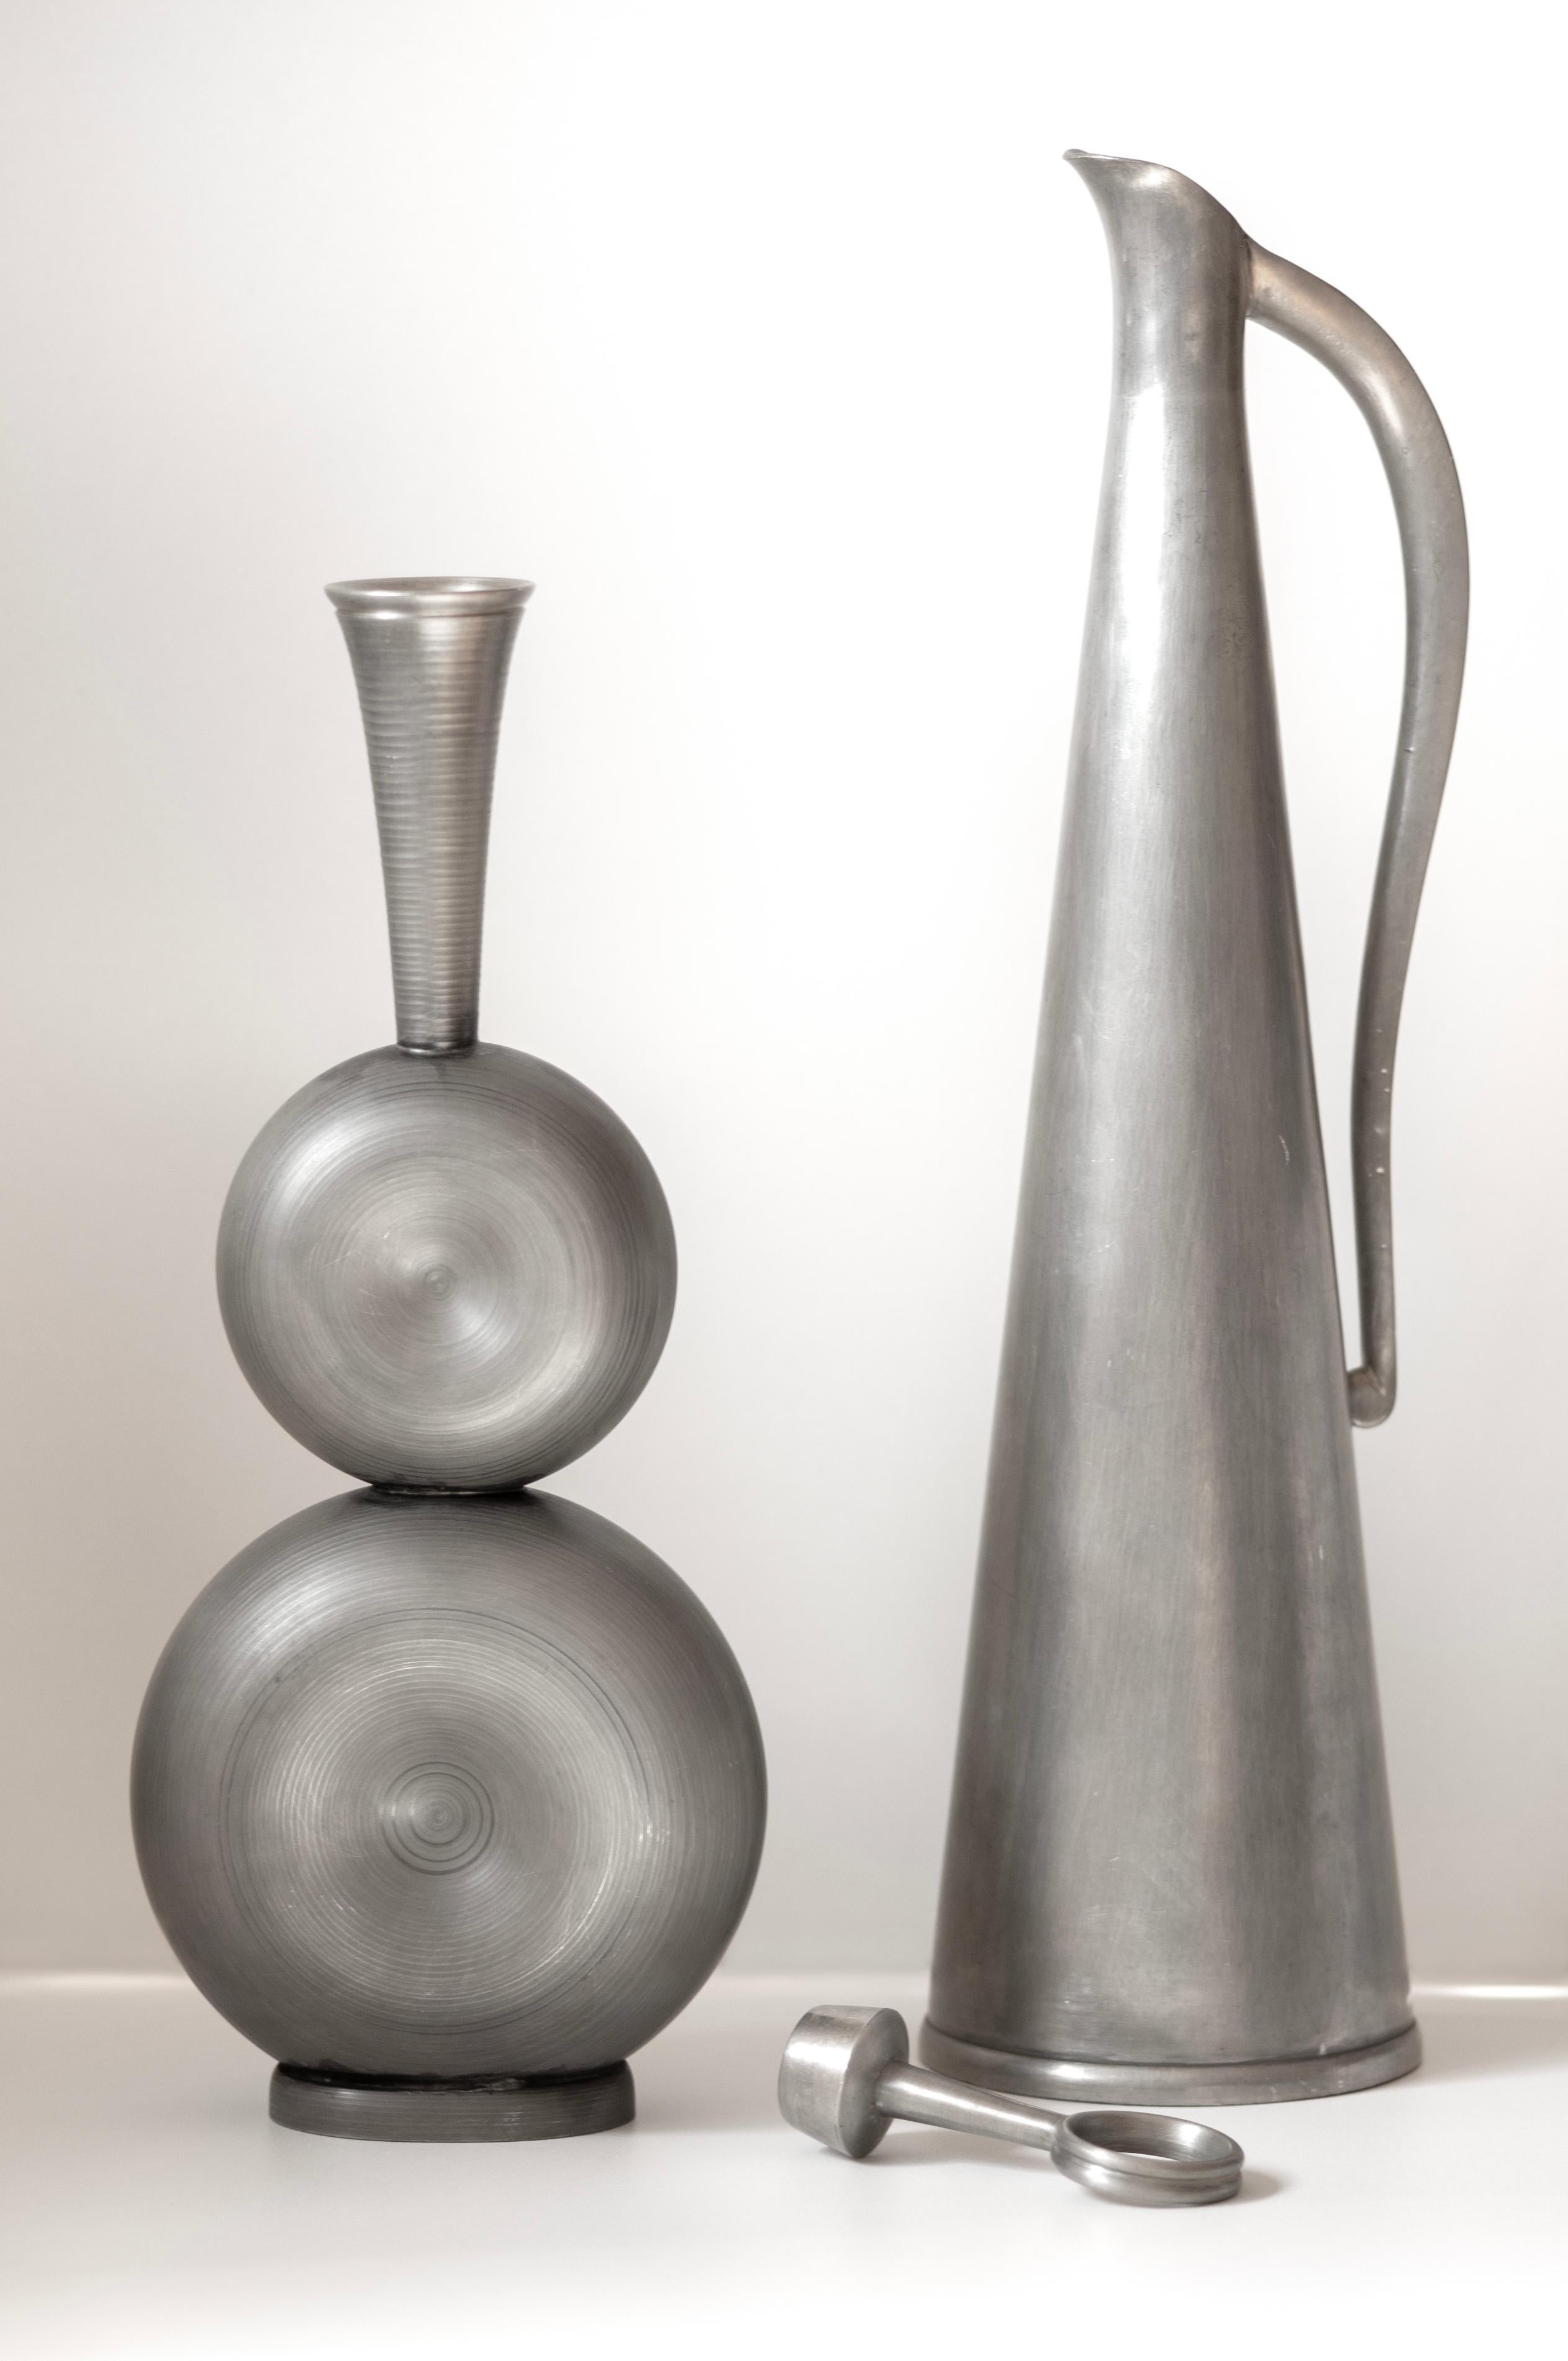 Exquisite Sculptural Pewter Decanter by Gunnar Havstad, Norway, 1950s - A Collectible Masterpiece

The Artistry of the Pewter Decanter:
Elevate your collection with this exquisite sculptural pewter decanter by renowned artist Gunnar Havstad. Crafted